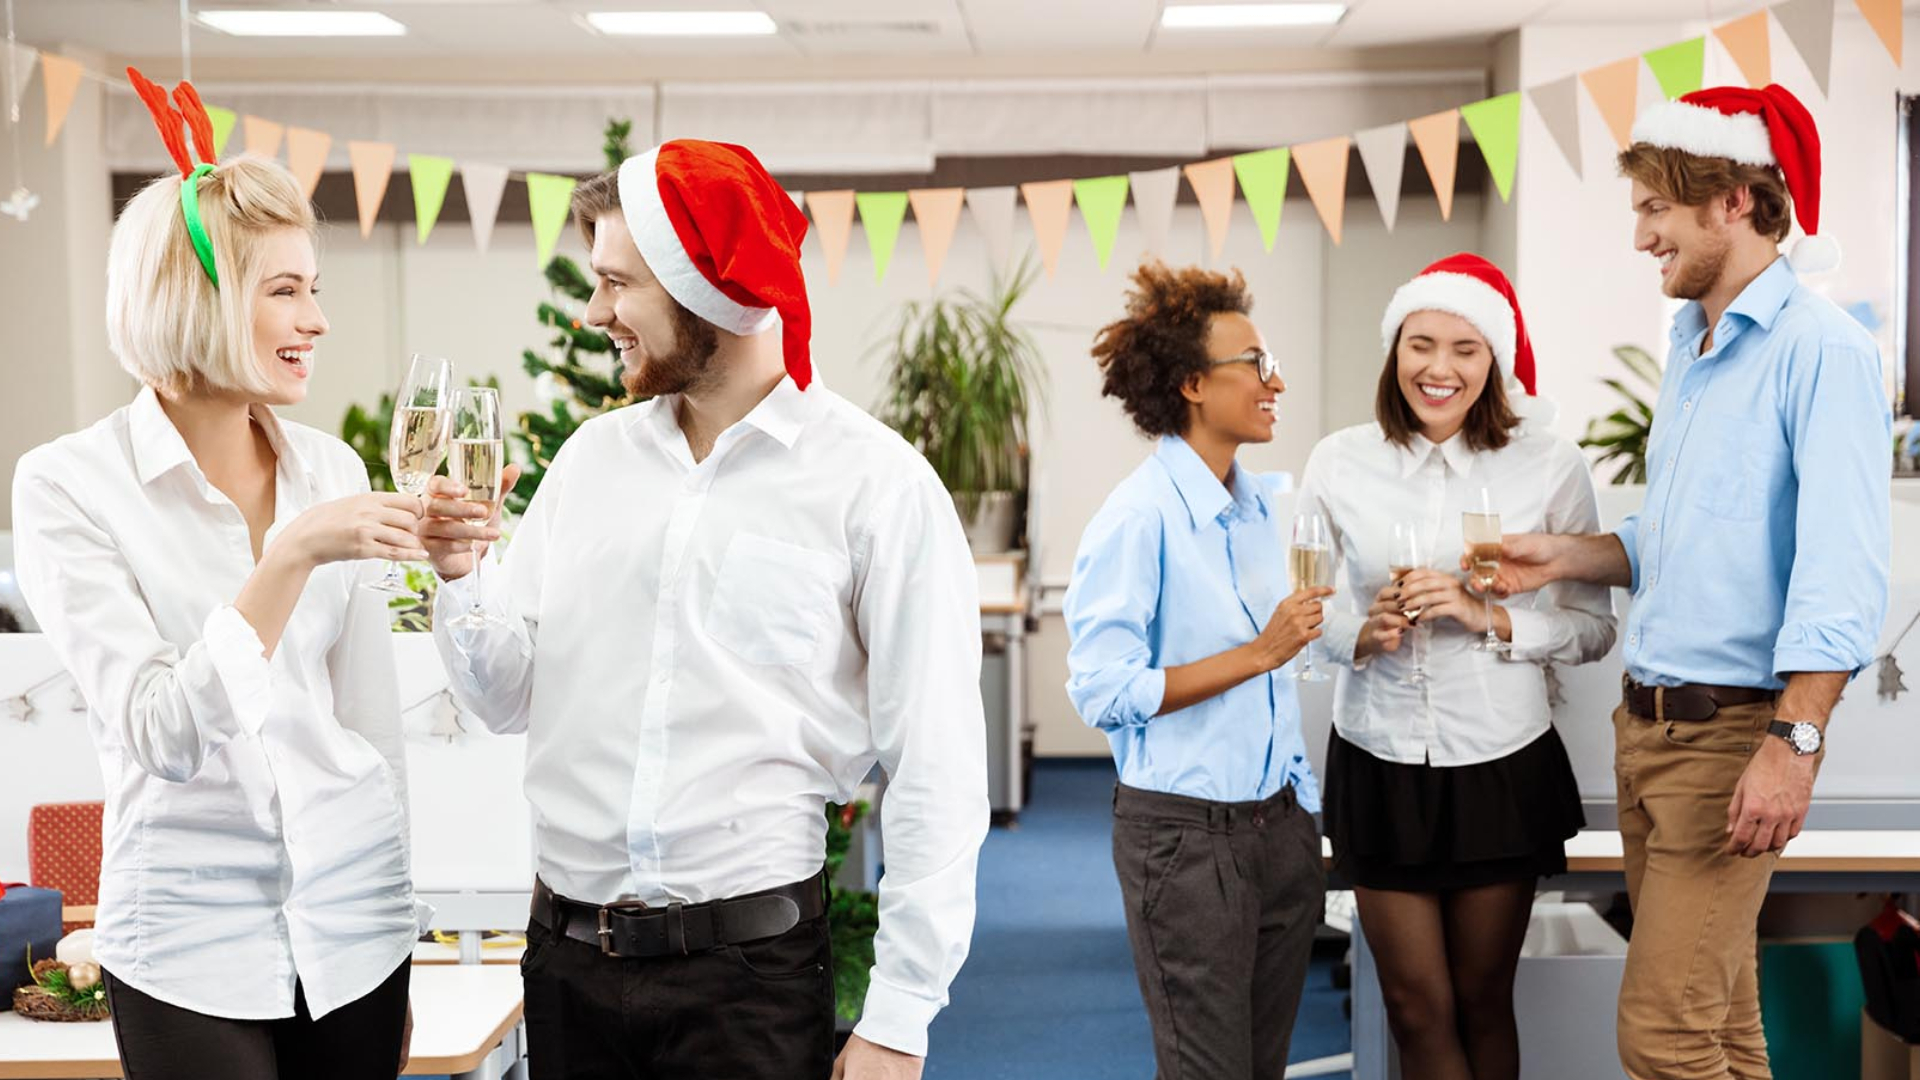 How to best avoid conflict at your next holiday party